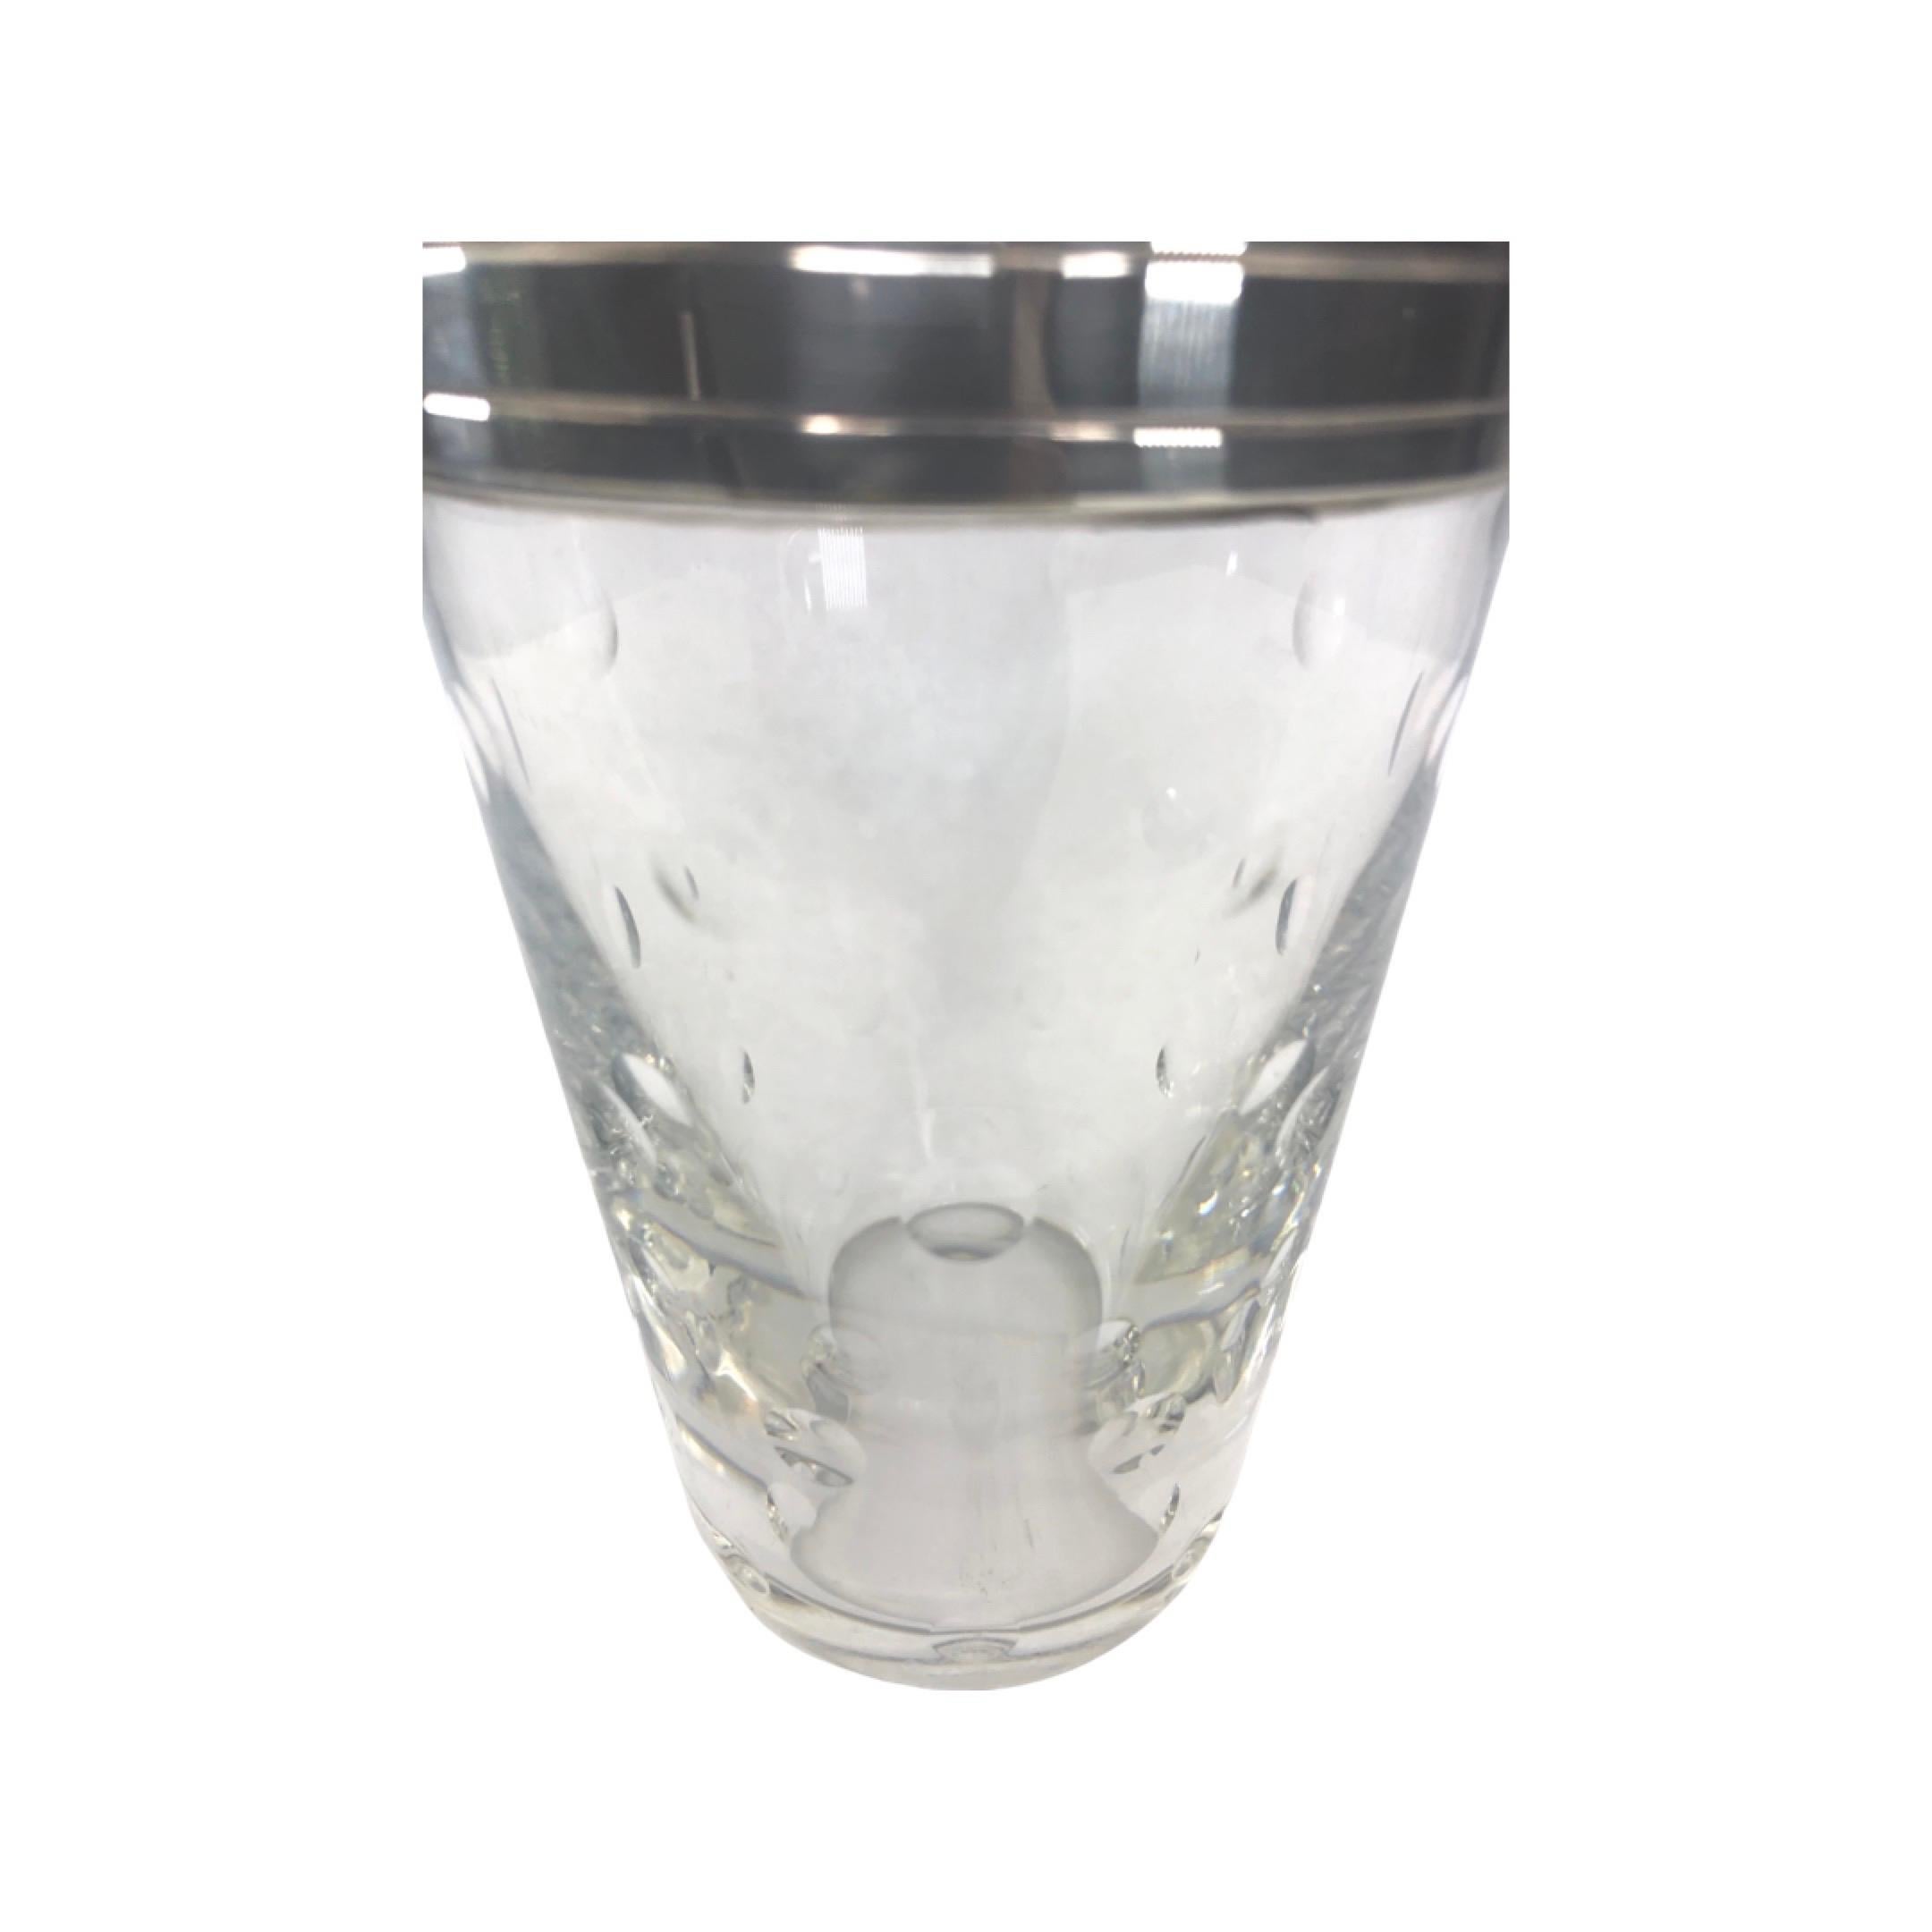 1930s French St. Louis Crystal Cocktail Shaker. The heavy leaded crystal shaker features dimpled design in the crystal and a silver plated collar and lid. Stamped on the underside 